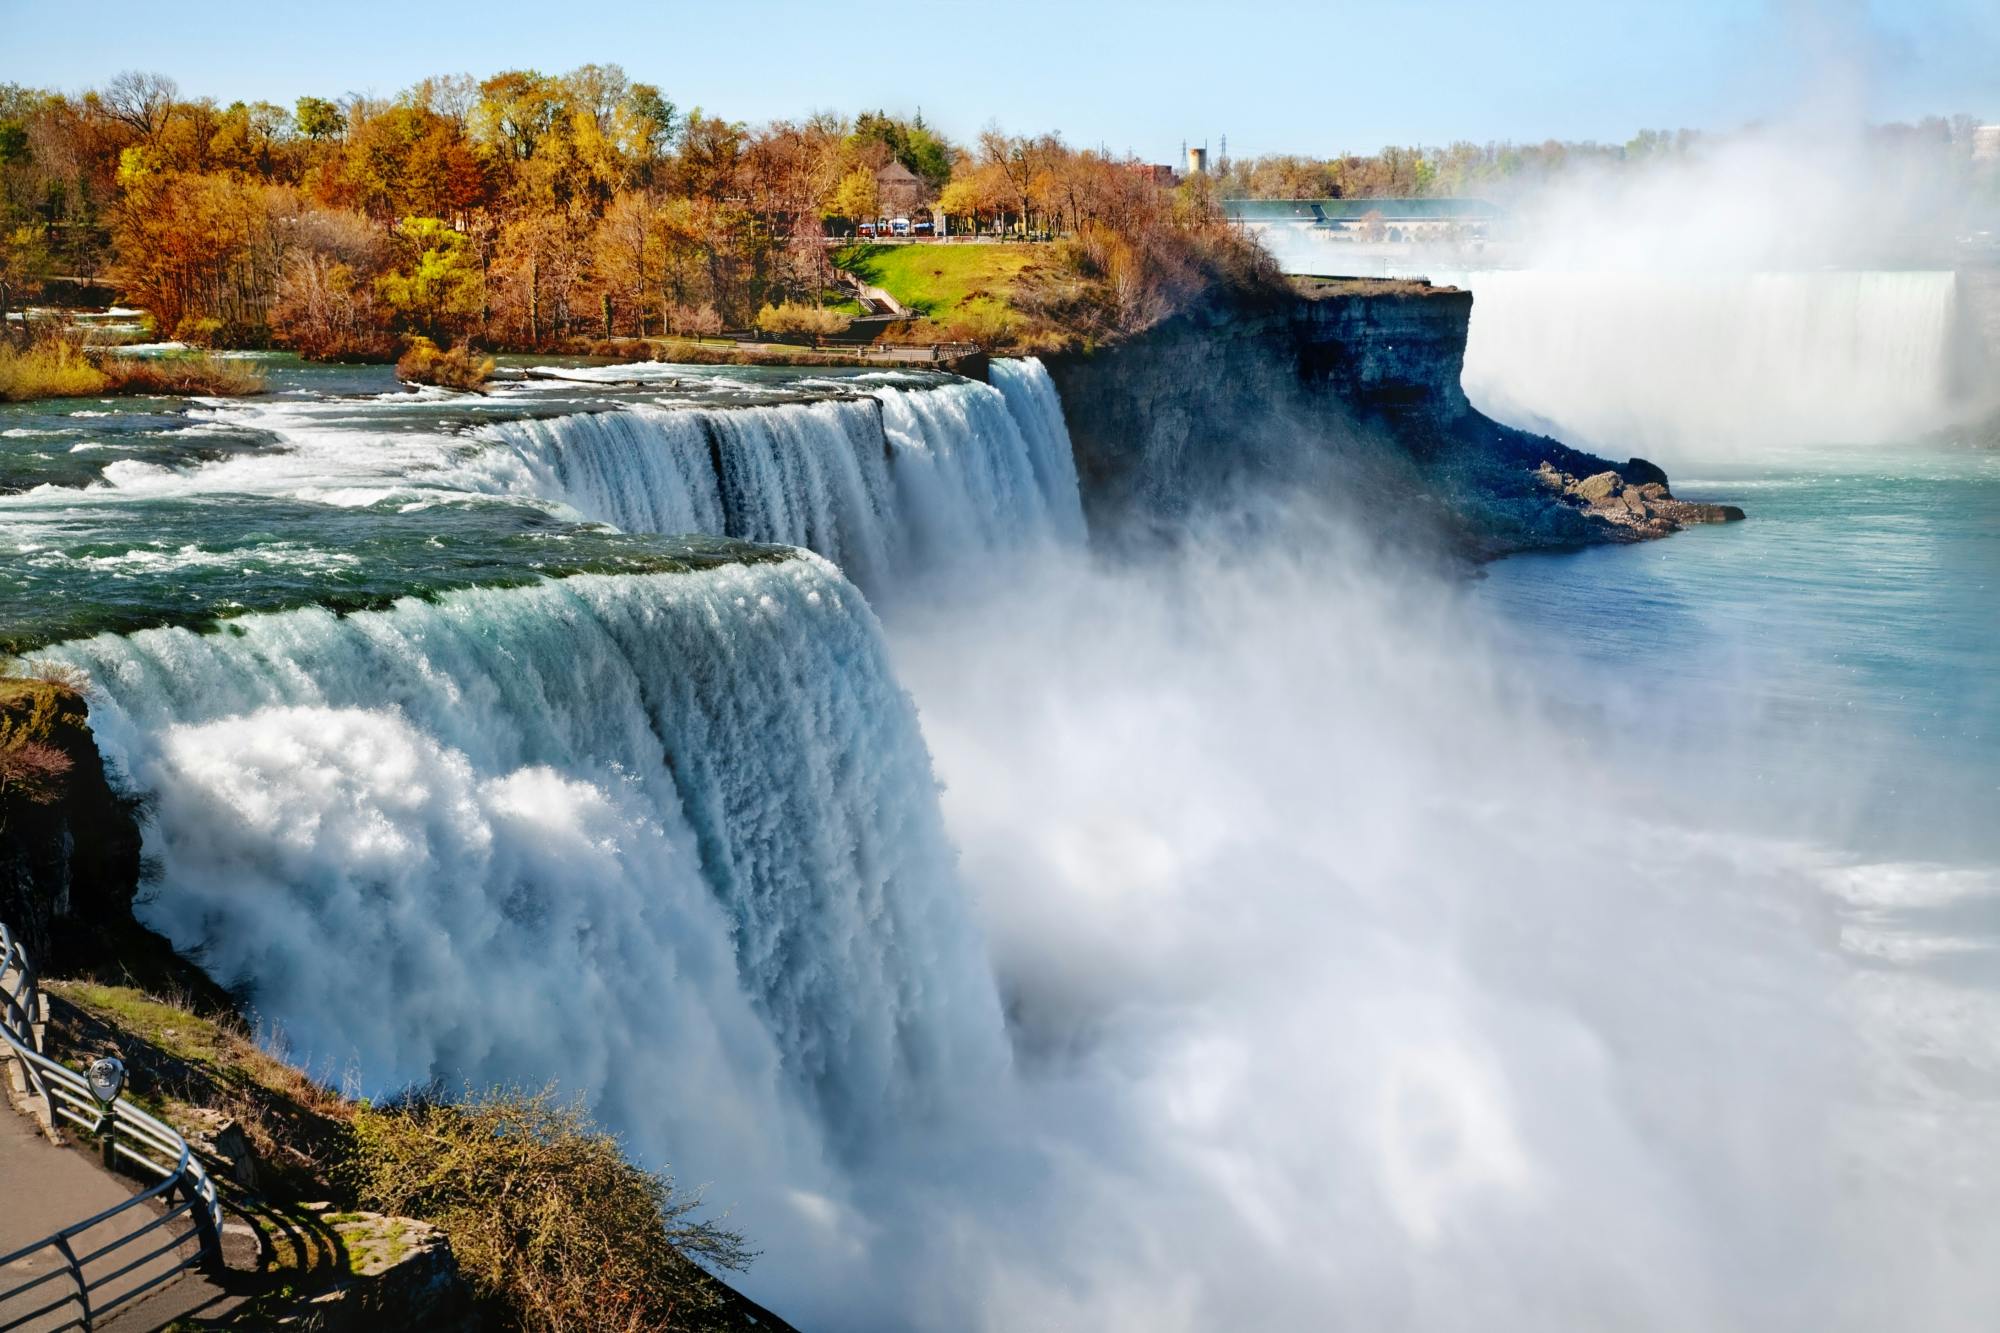 Niagara Falls tour with tickets to the Cave of Winds and a